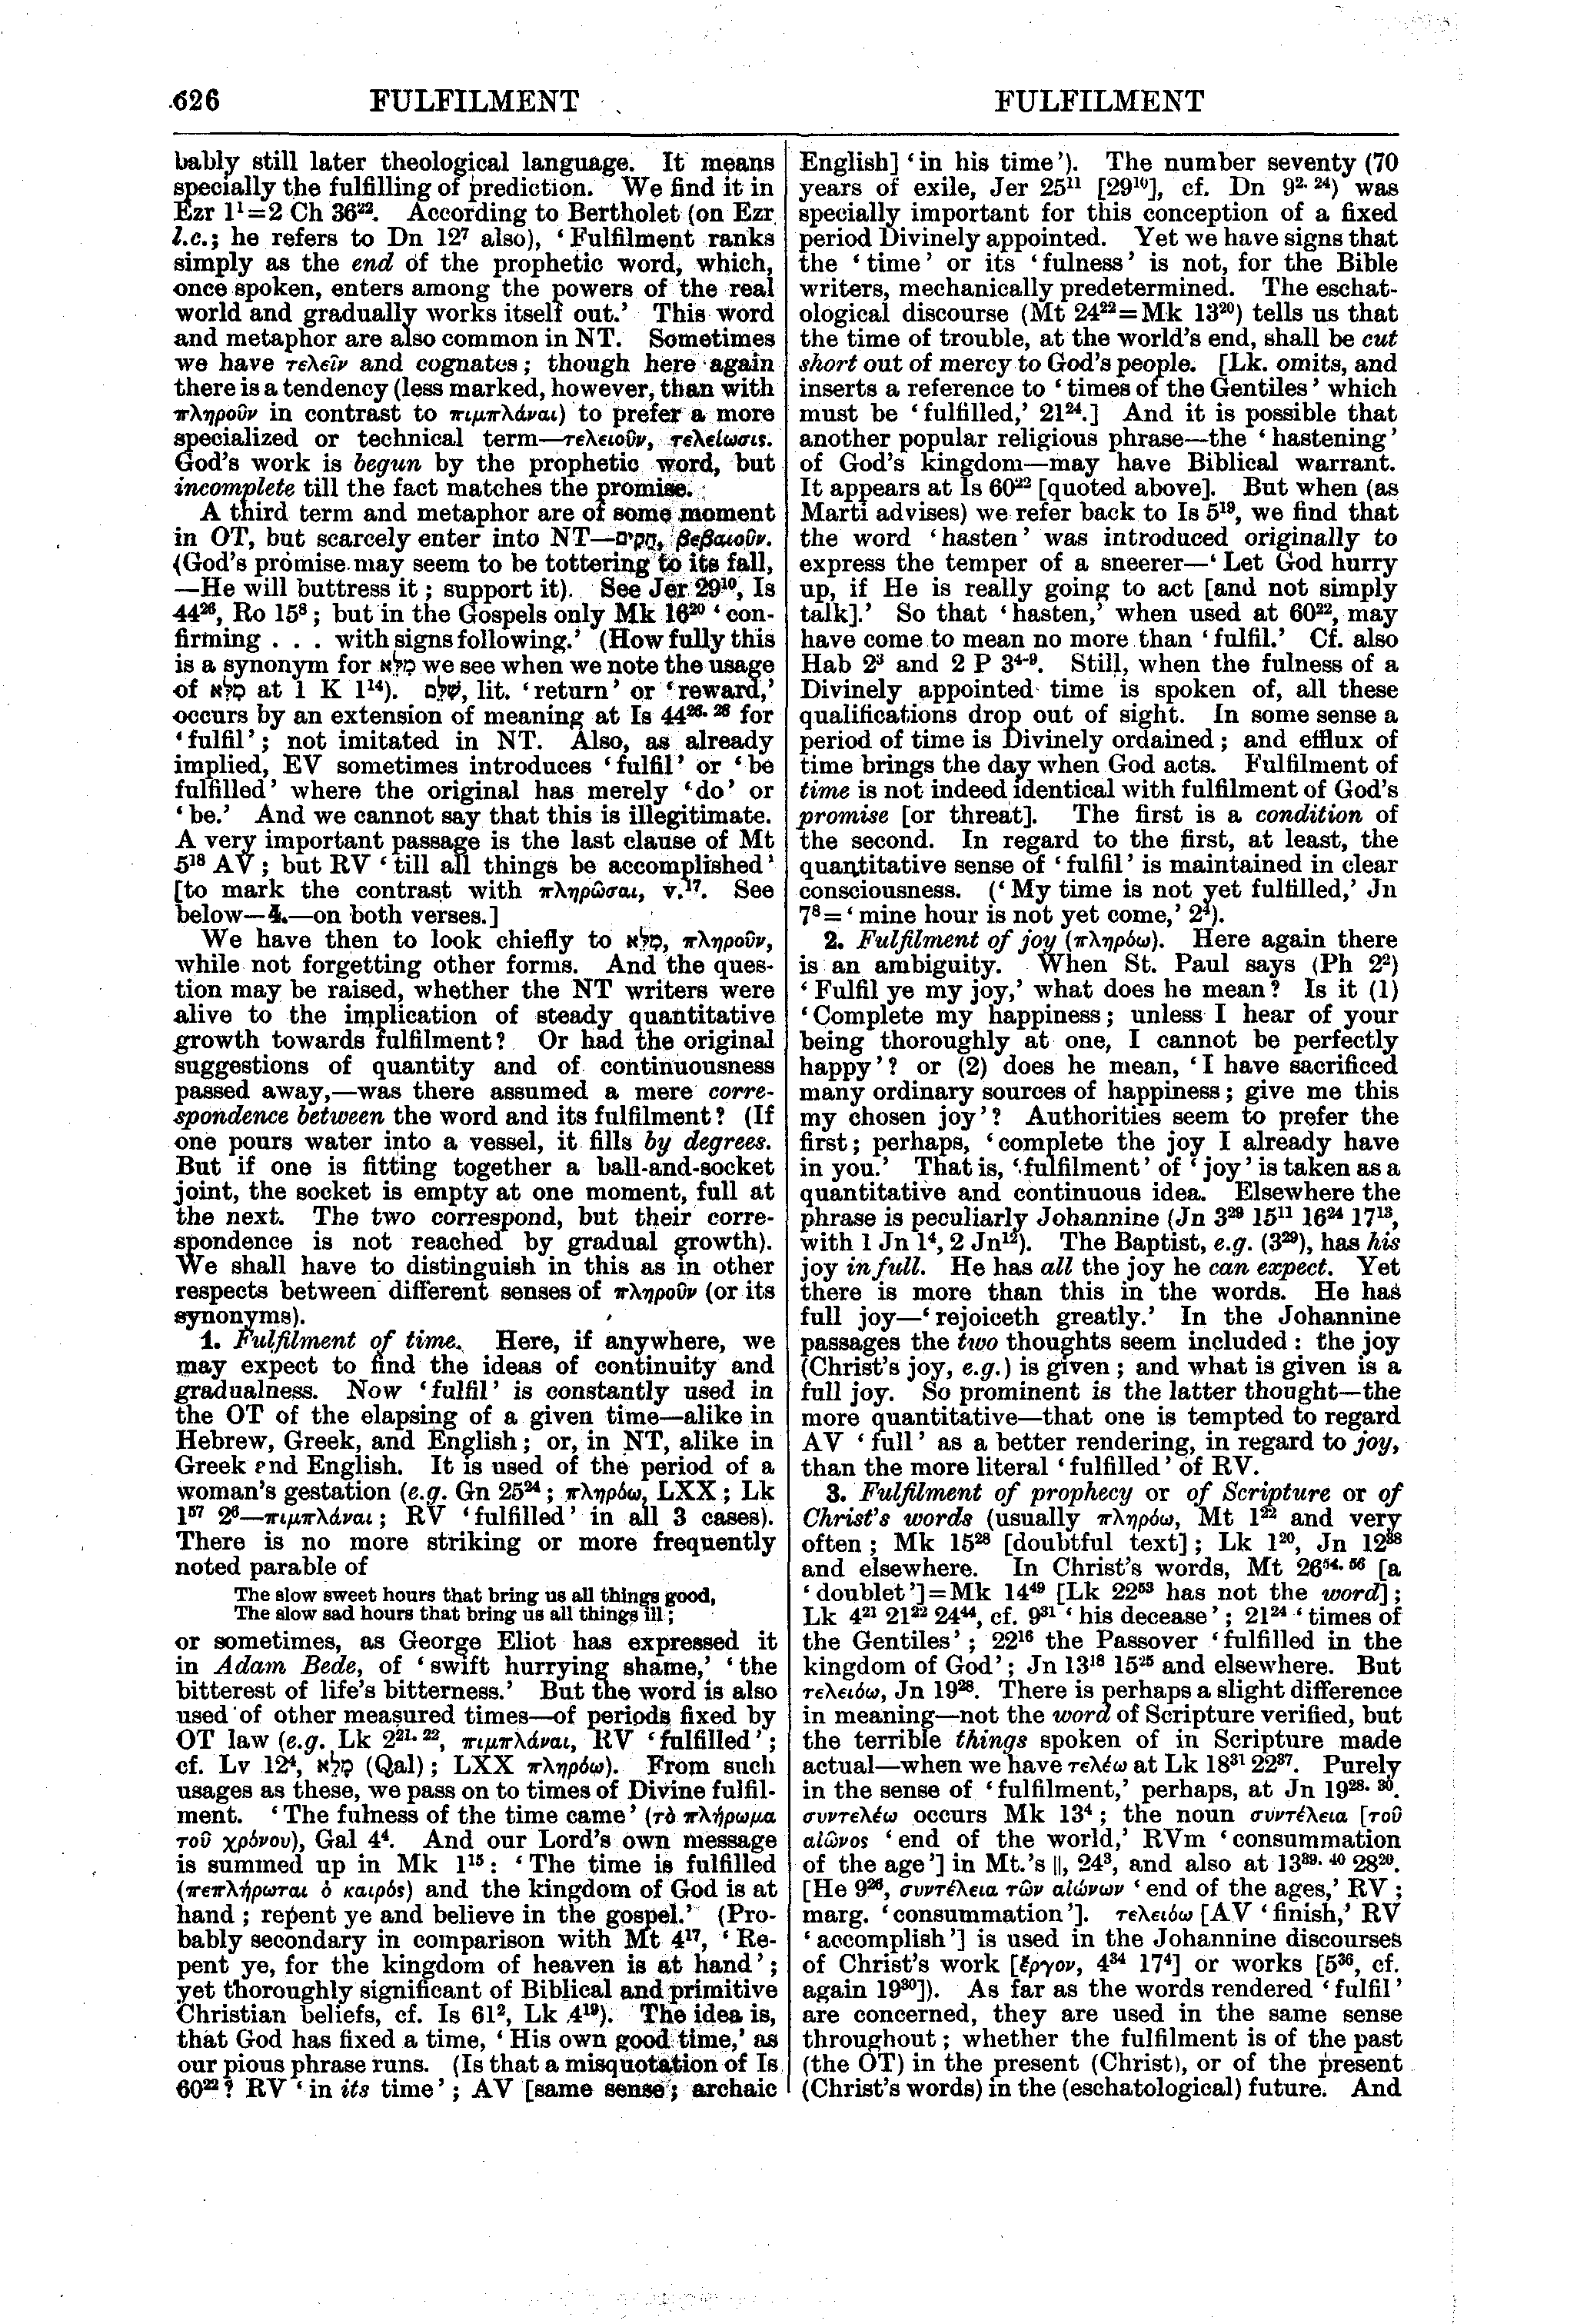 Image of page 626